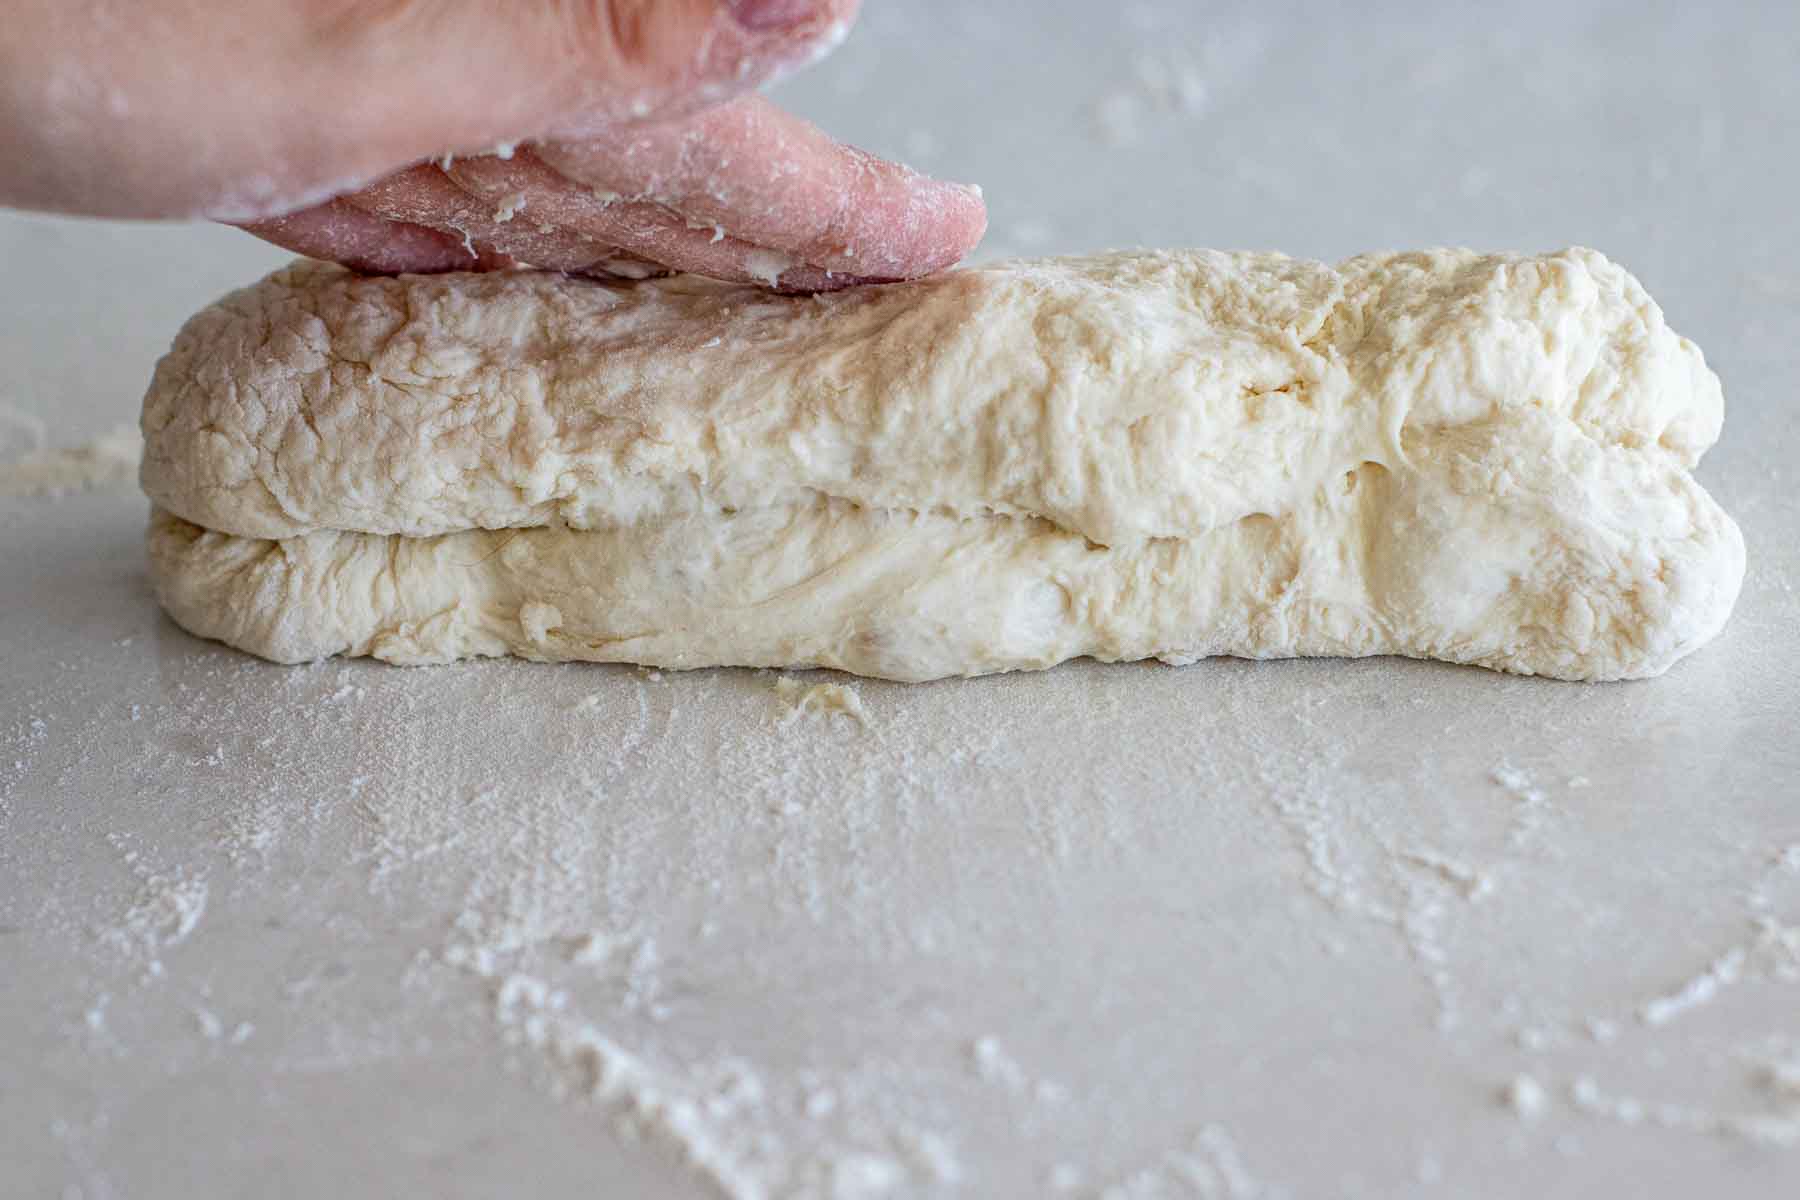 Folding the dough in the middle.